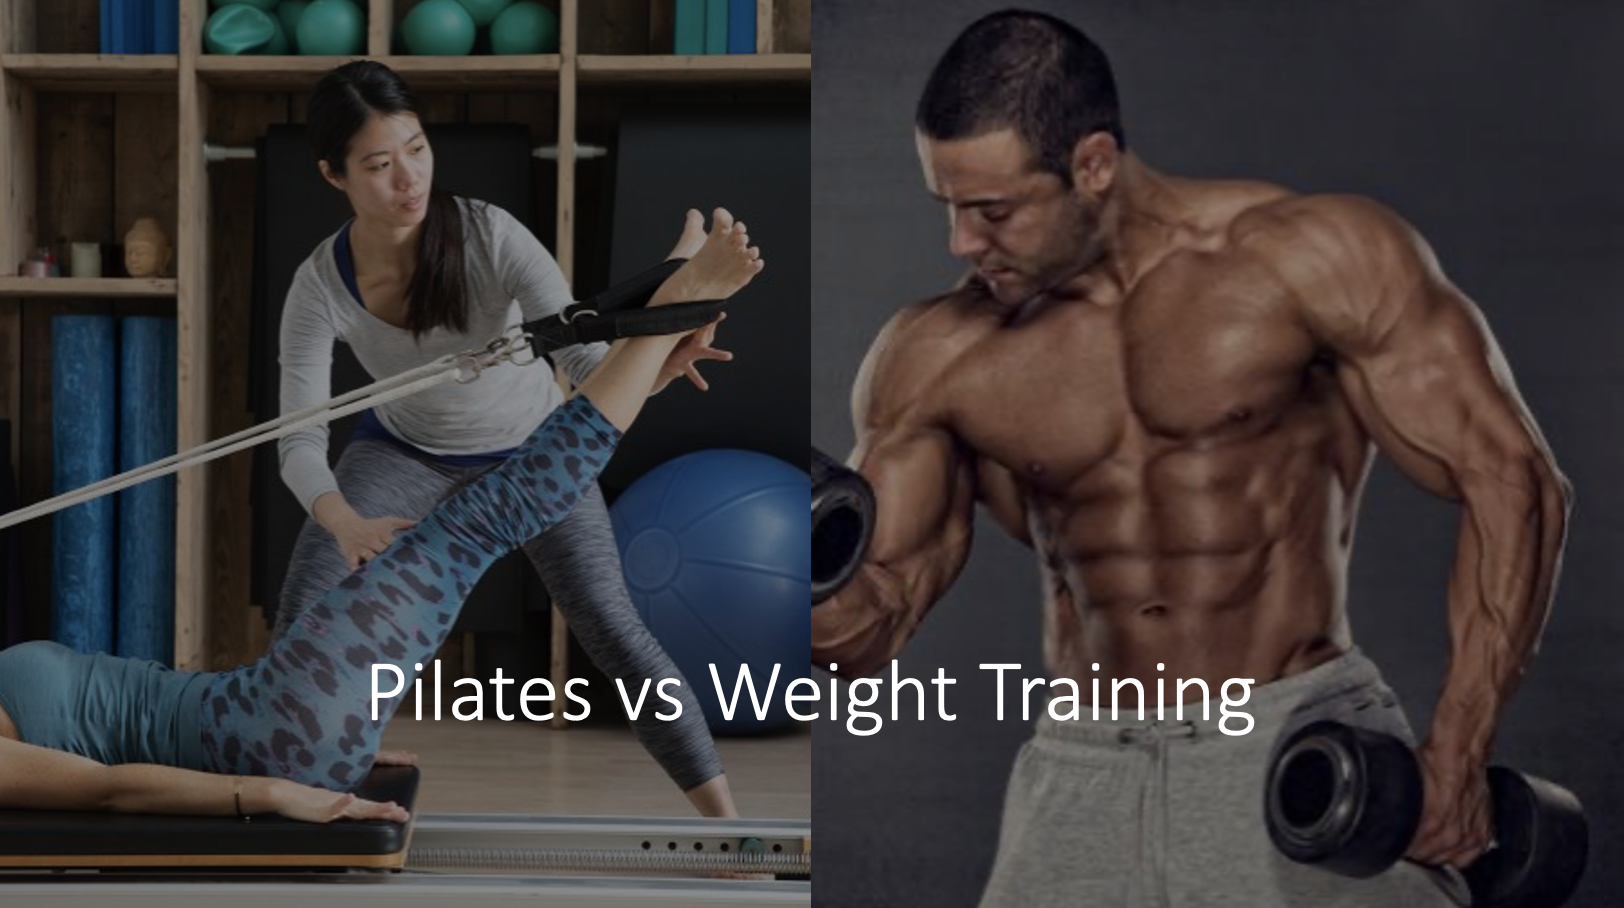 PILATES VS WEIGHT TRAINING: WHICH IS BEST?